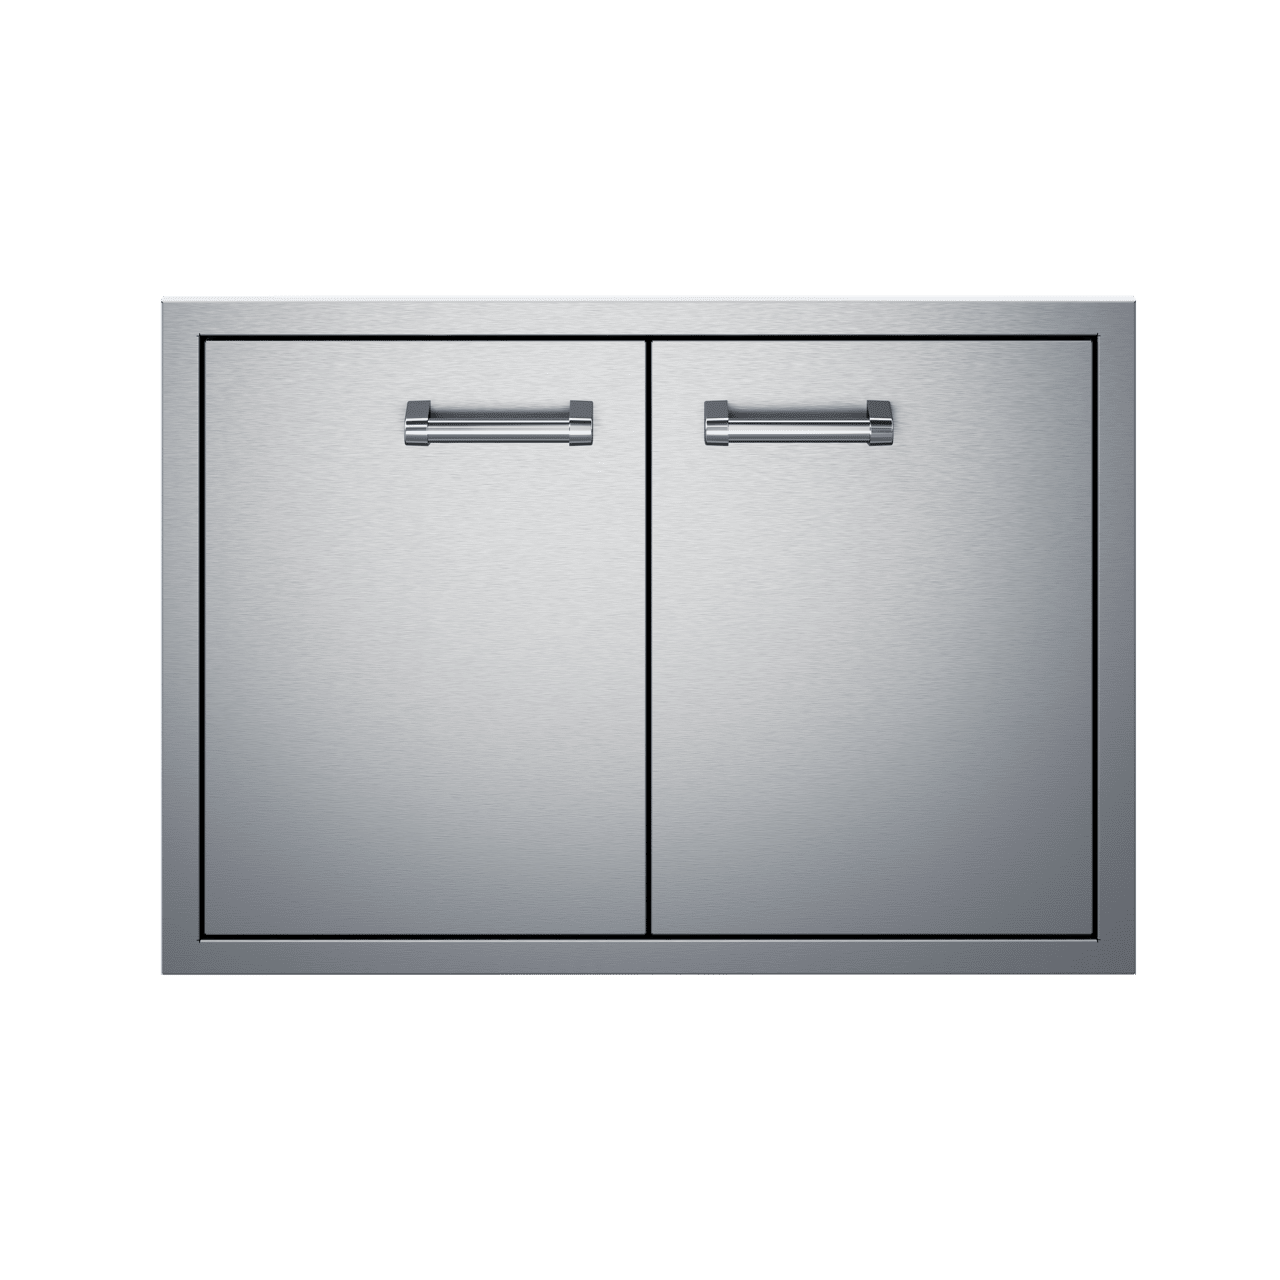 Delta Heat Stainless Steel Double Access Doors Cabinets & Storage 30